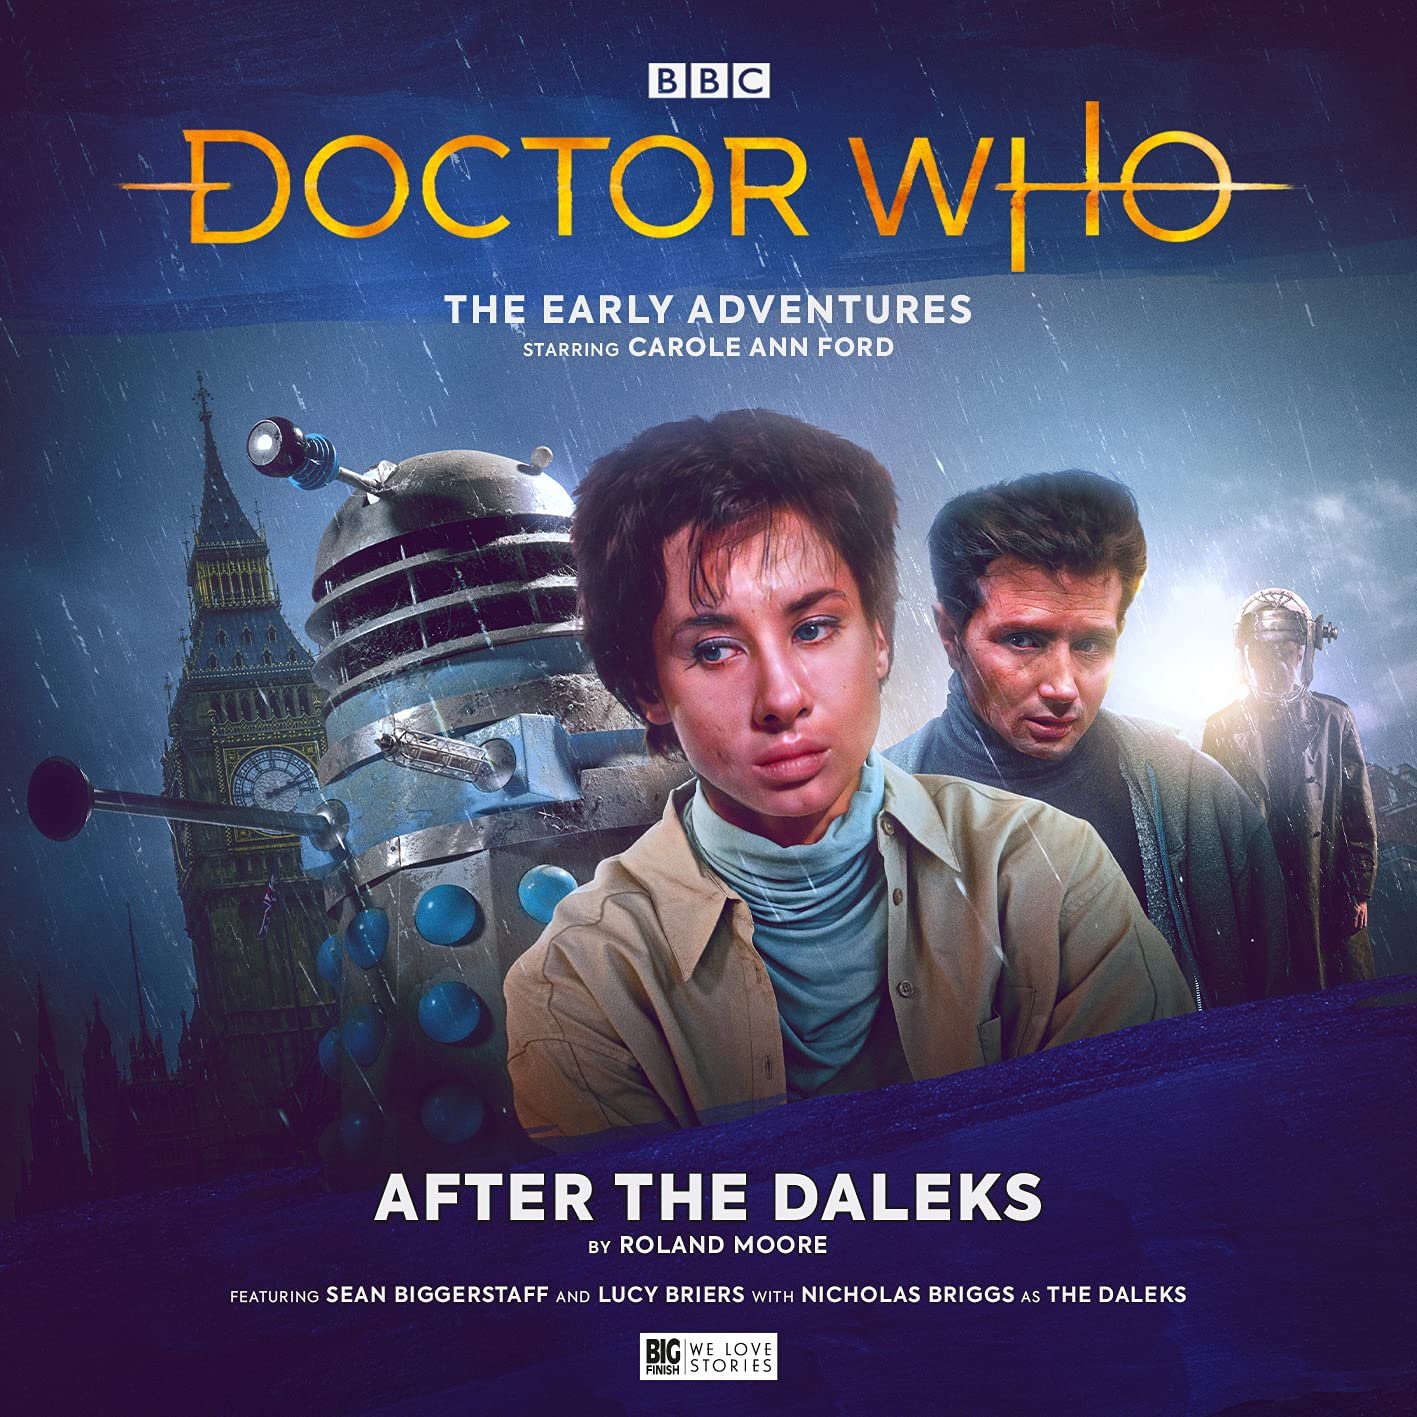 After the Daleks, Reviewed: A Thoroughly Modern 1960s Story from the Future